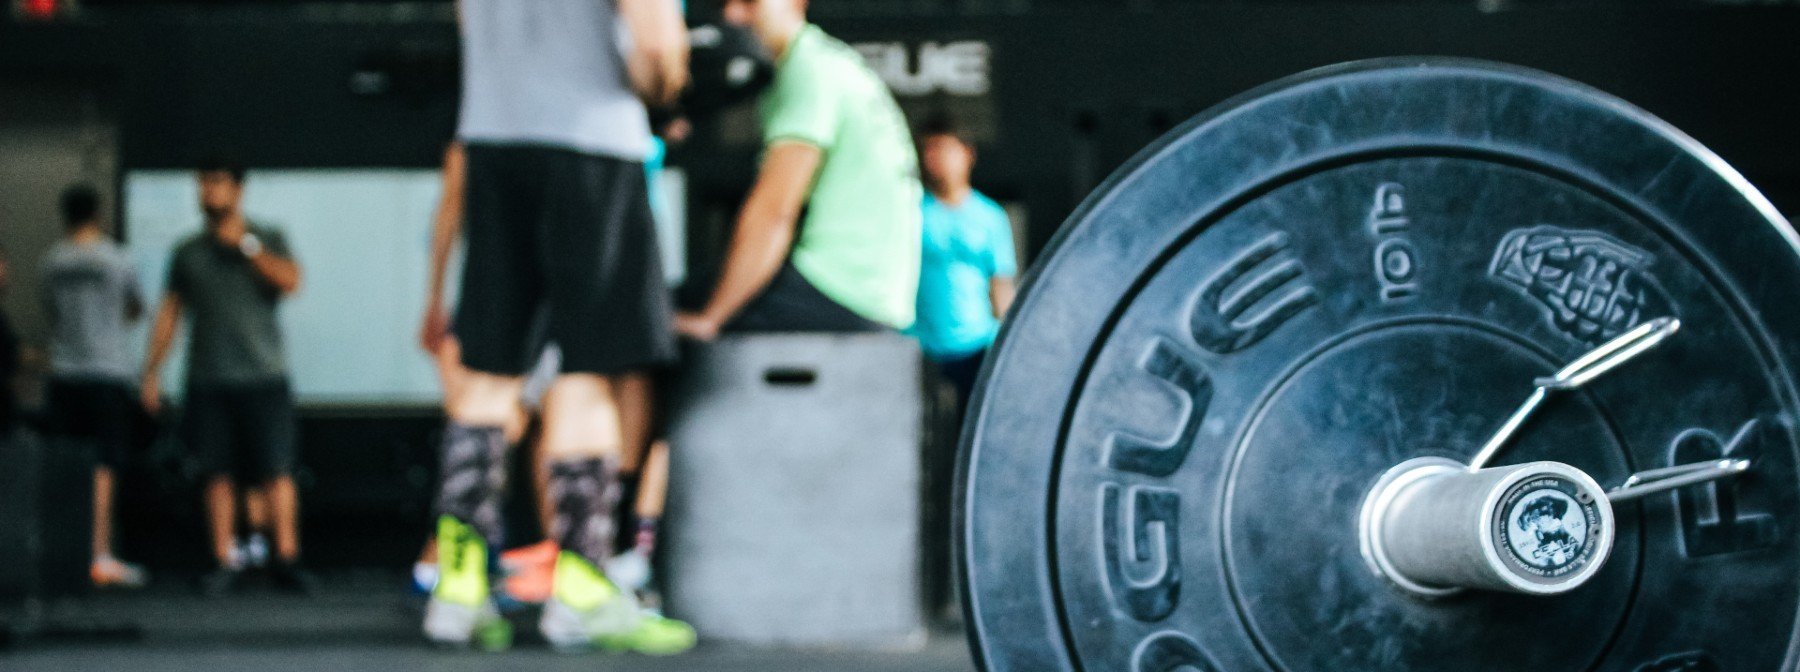 Can You Build Muscle With Just A Barbell? The Only Equipment You’ll Need For The Gym